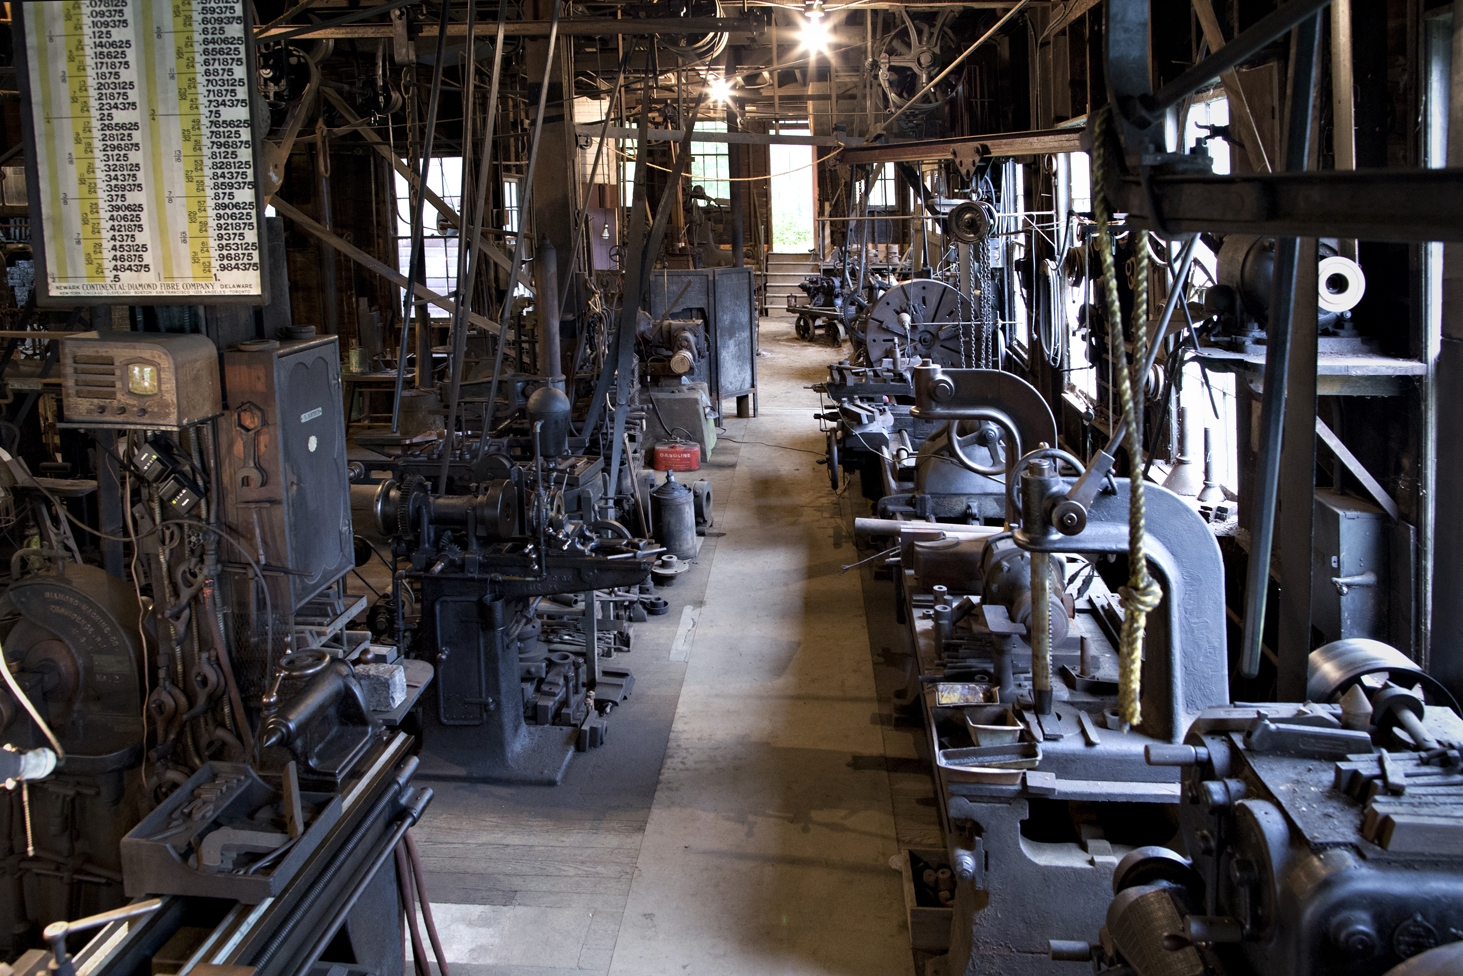 W.A. Young & Sons Foundry & Machine Shop: Machine Shop (H) – Abandoned  Pittsburgh